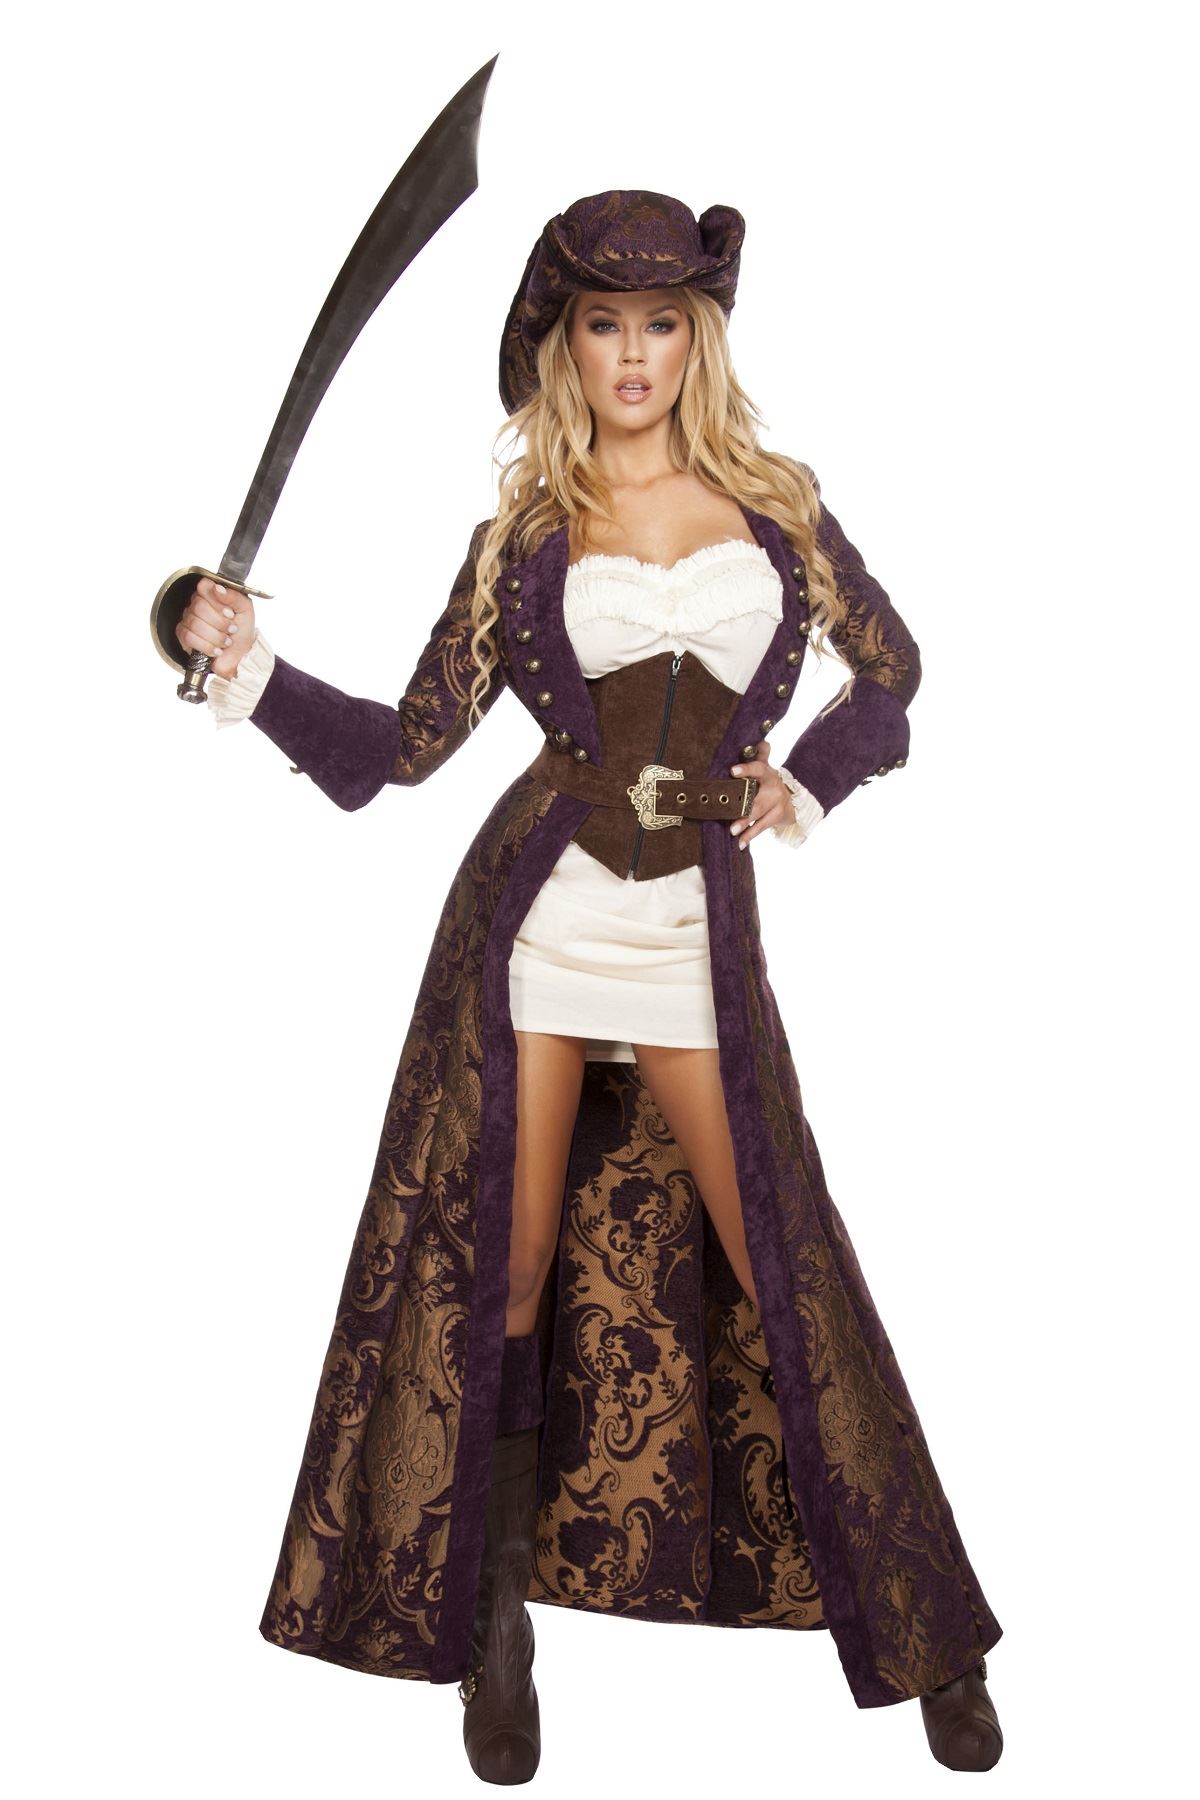 Adult Decadent Pirate Diva Woman Deluxe Costume 22999 The Costume Land 3334